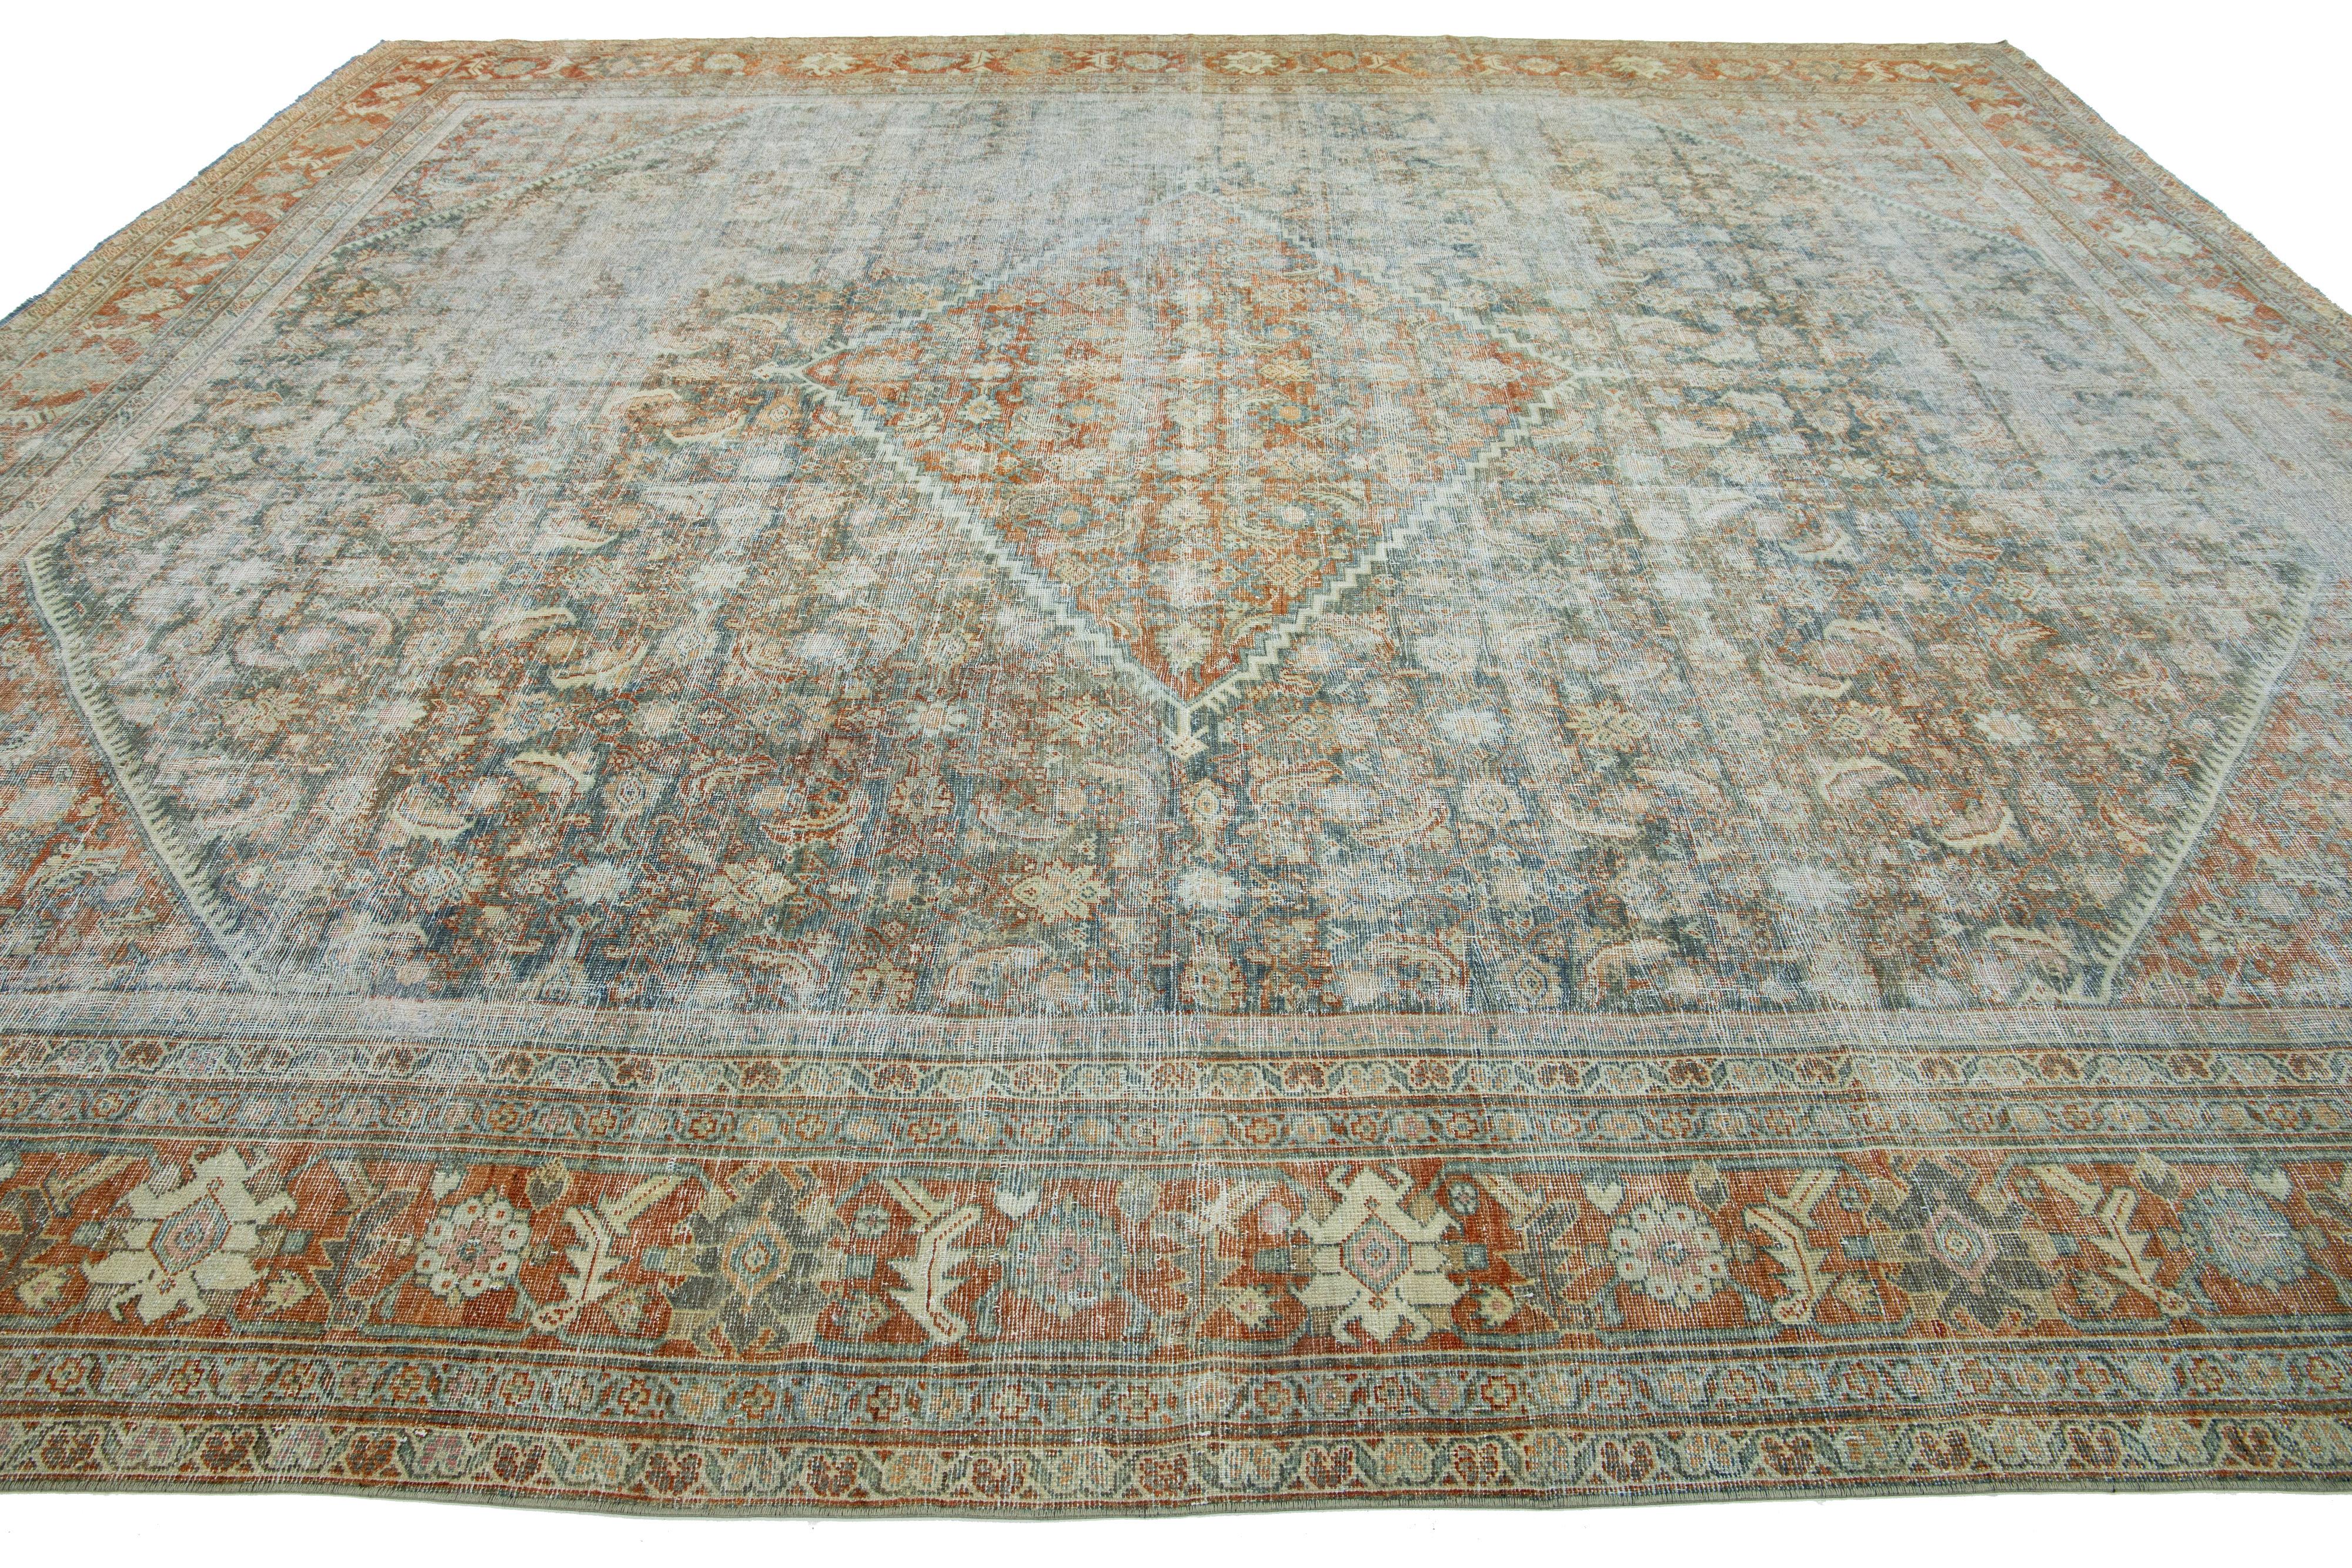 1910s Antique Persian Mahal Allover Wool Rug Handmade In Rust Color In Good Condition For Sale In Norwalk, CT